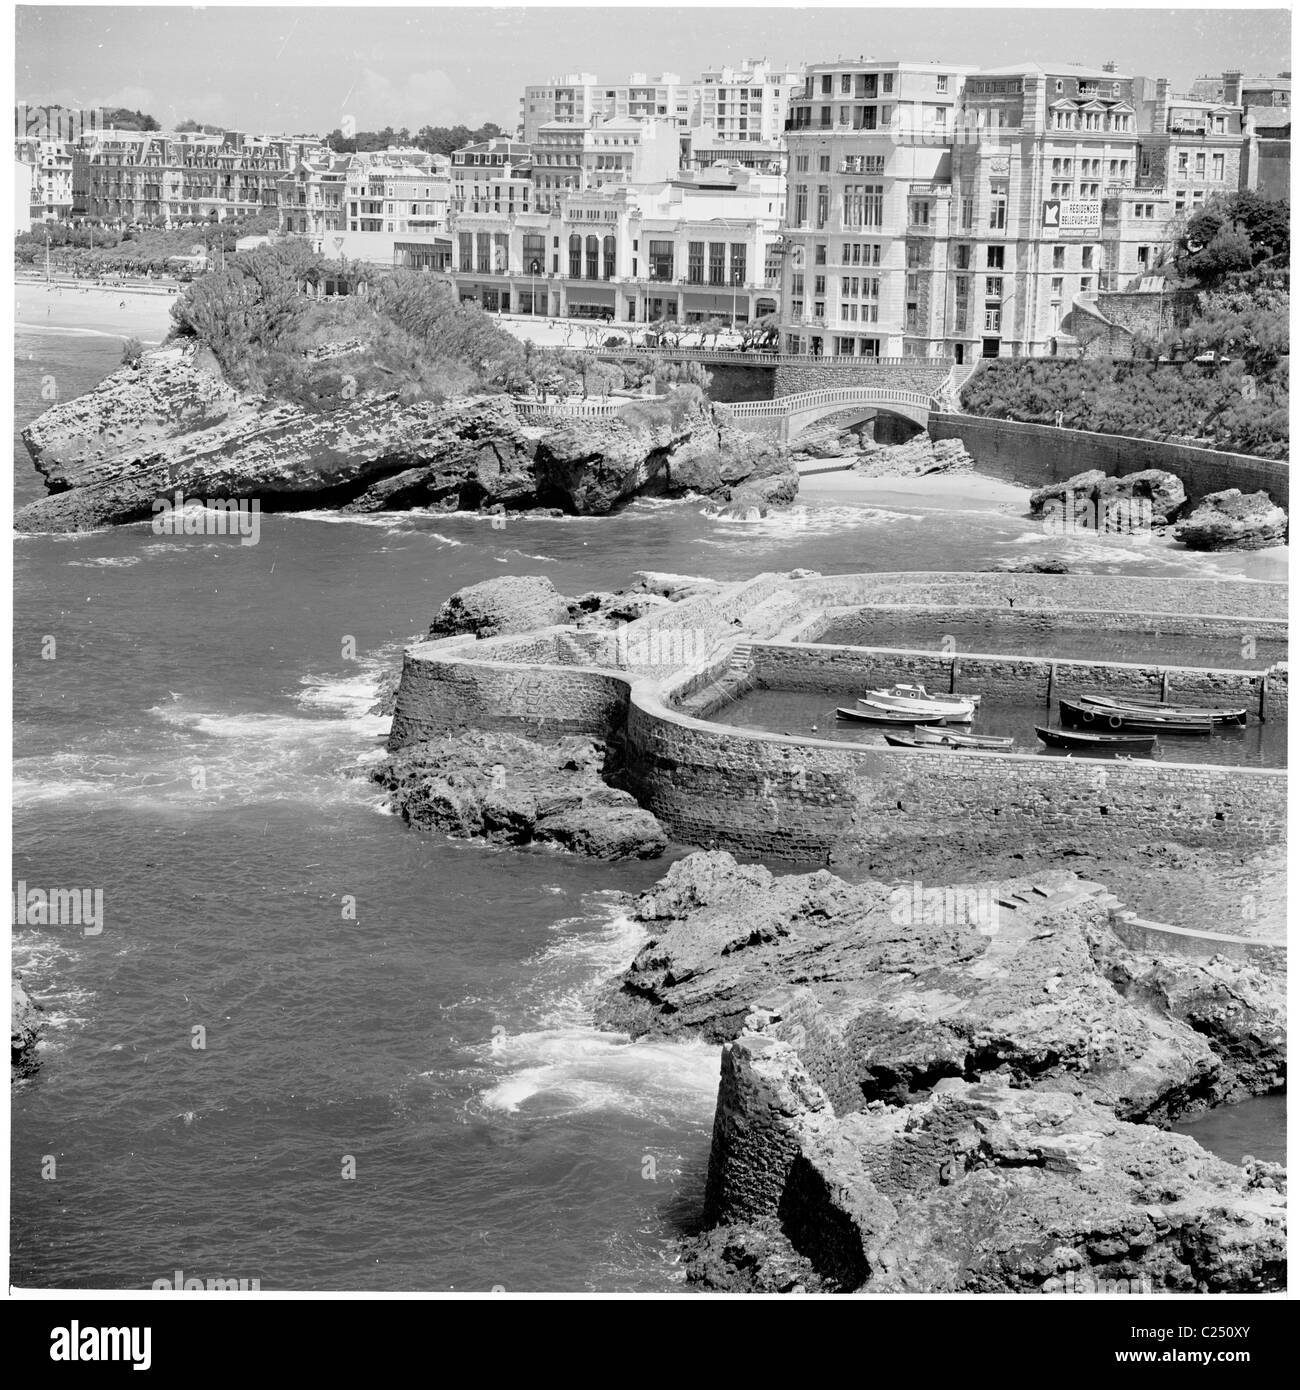 1950s, historical view of the rocky coast and seawall of the fisherman's port at the elegant seaside resort of Biarritz, France, on the Bay of Biscay. Stock Photo